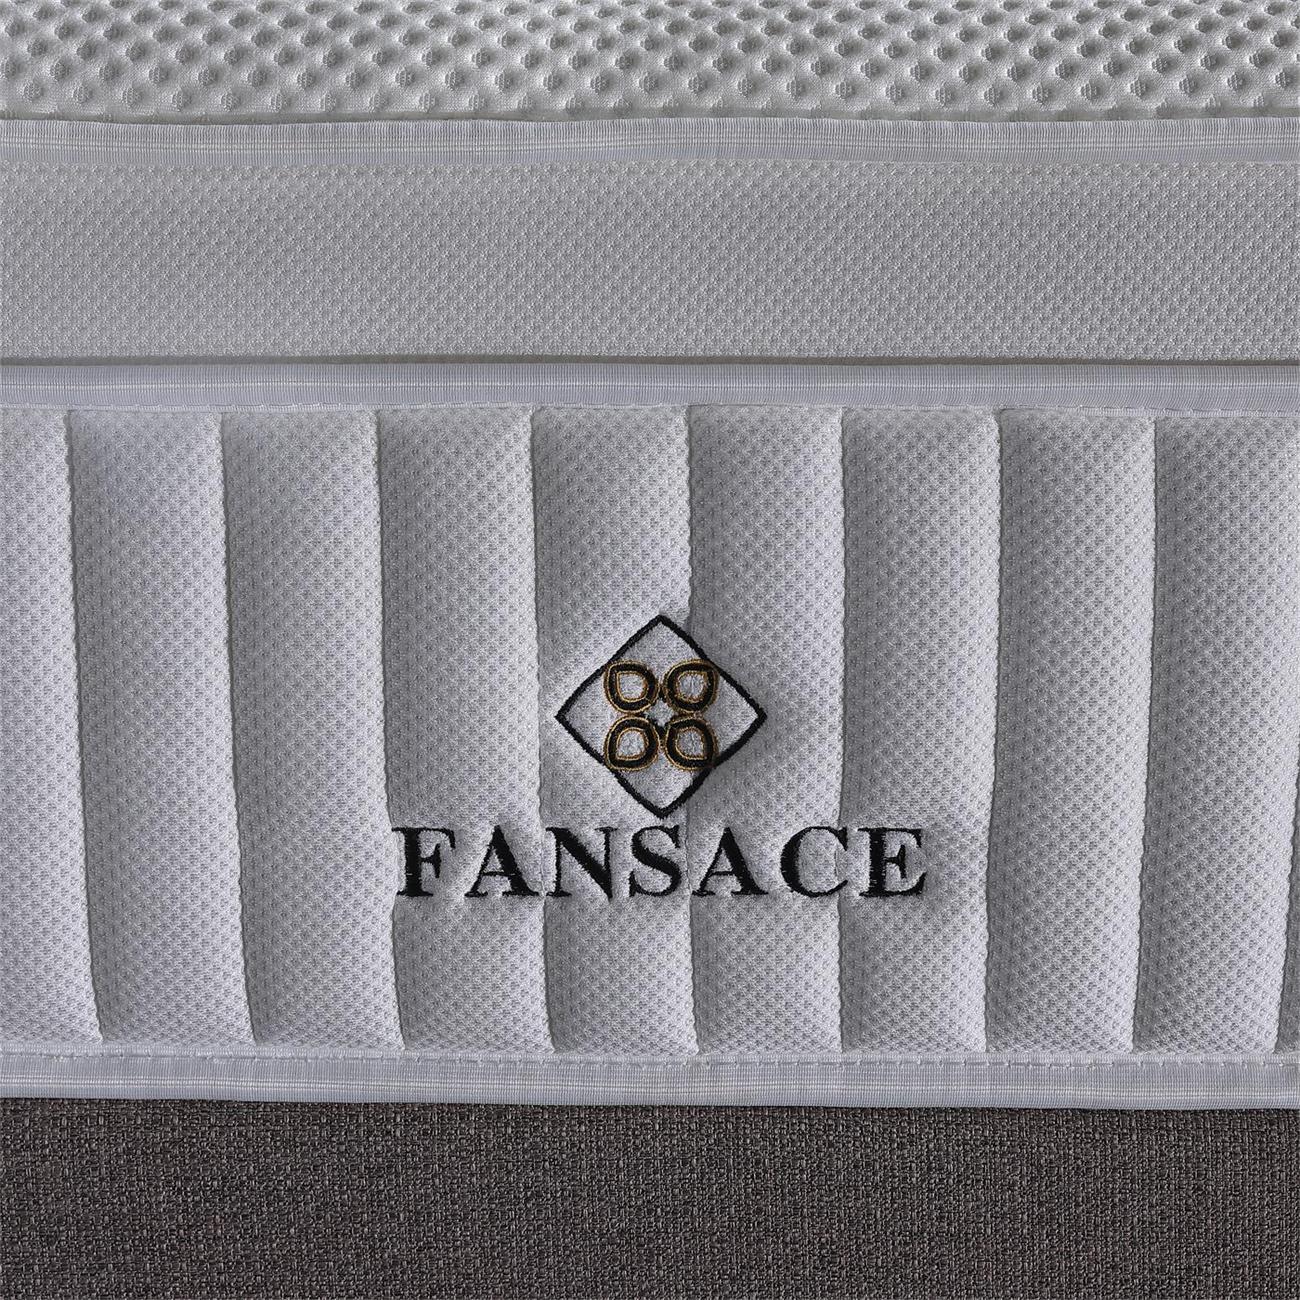 Fansace 34PA-02 Hotel Soft Sofa Bed Mattress With Euro Top Design For 5 Star Hotel